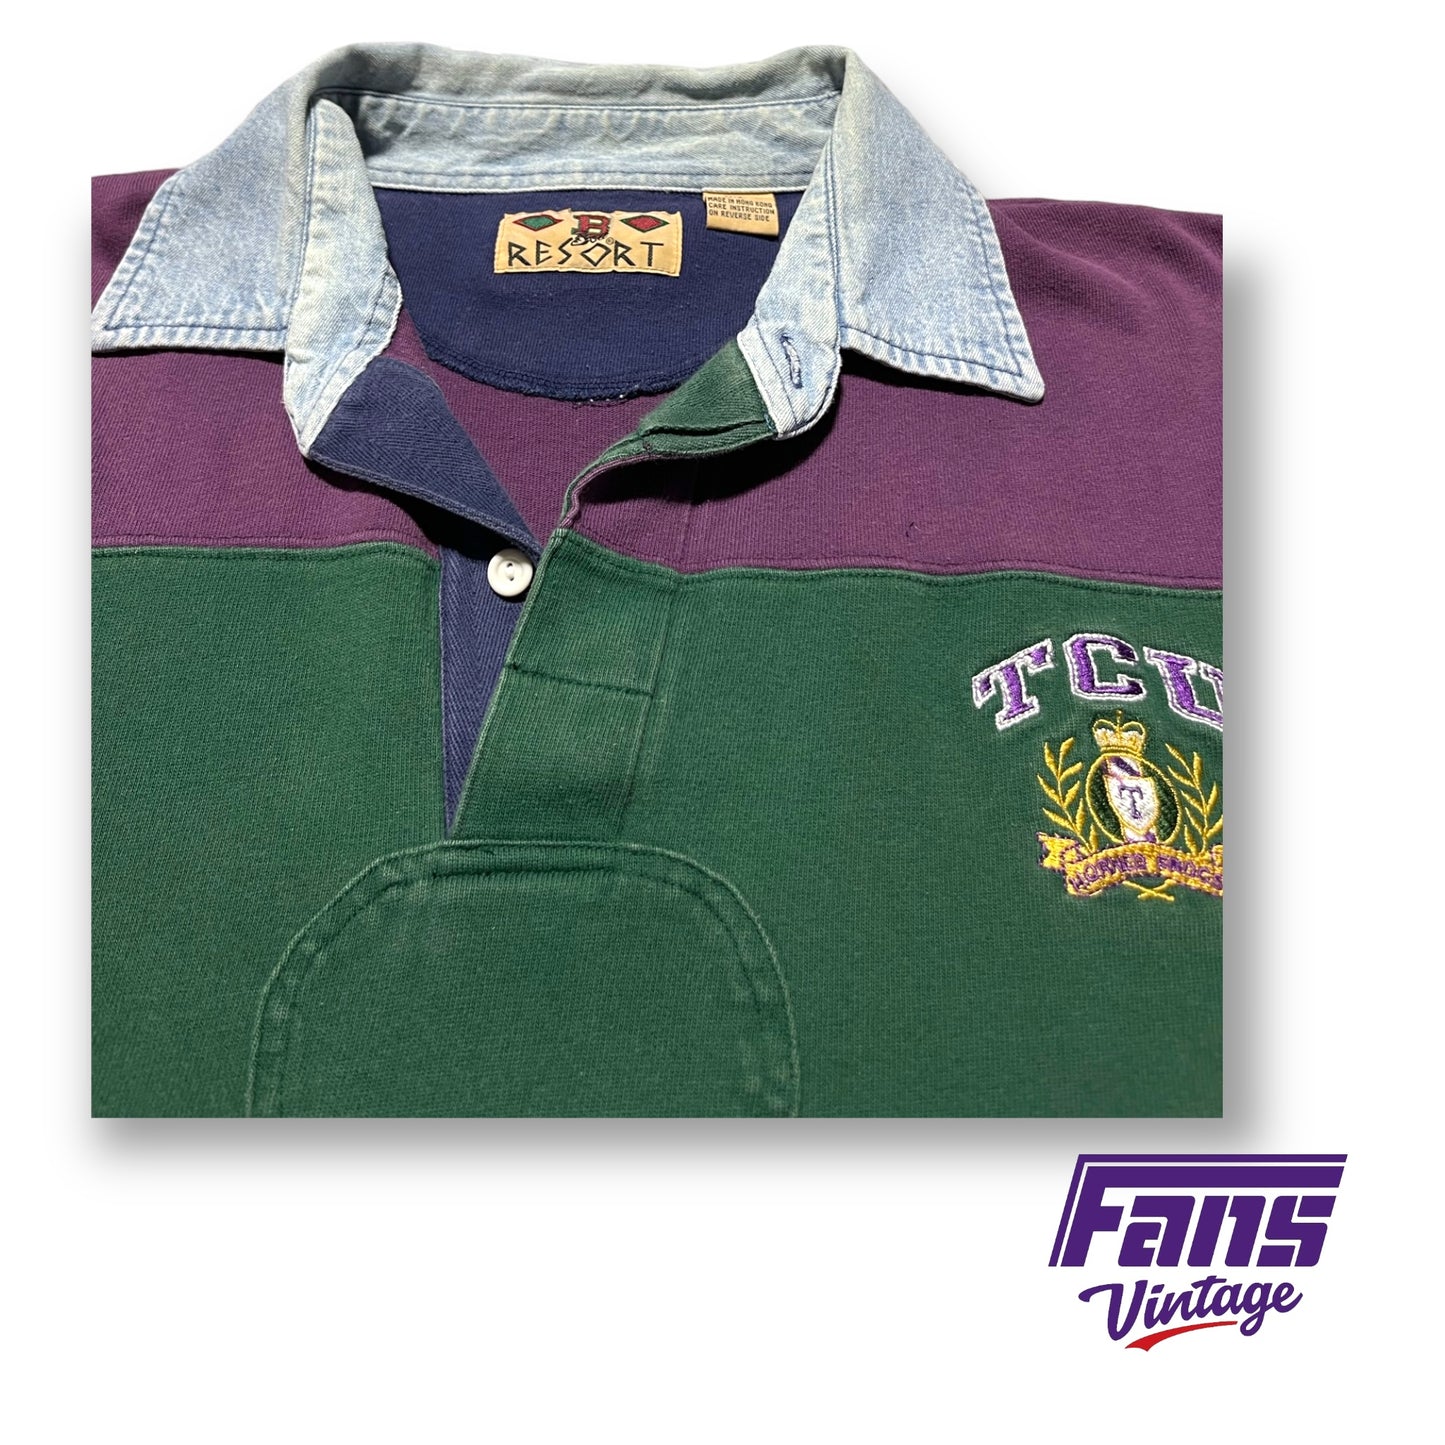 Awesome 90s Vintage TCU Rugby Style Polo